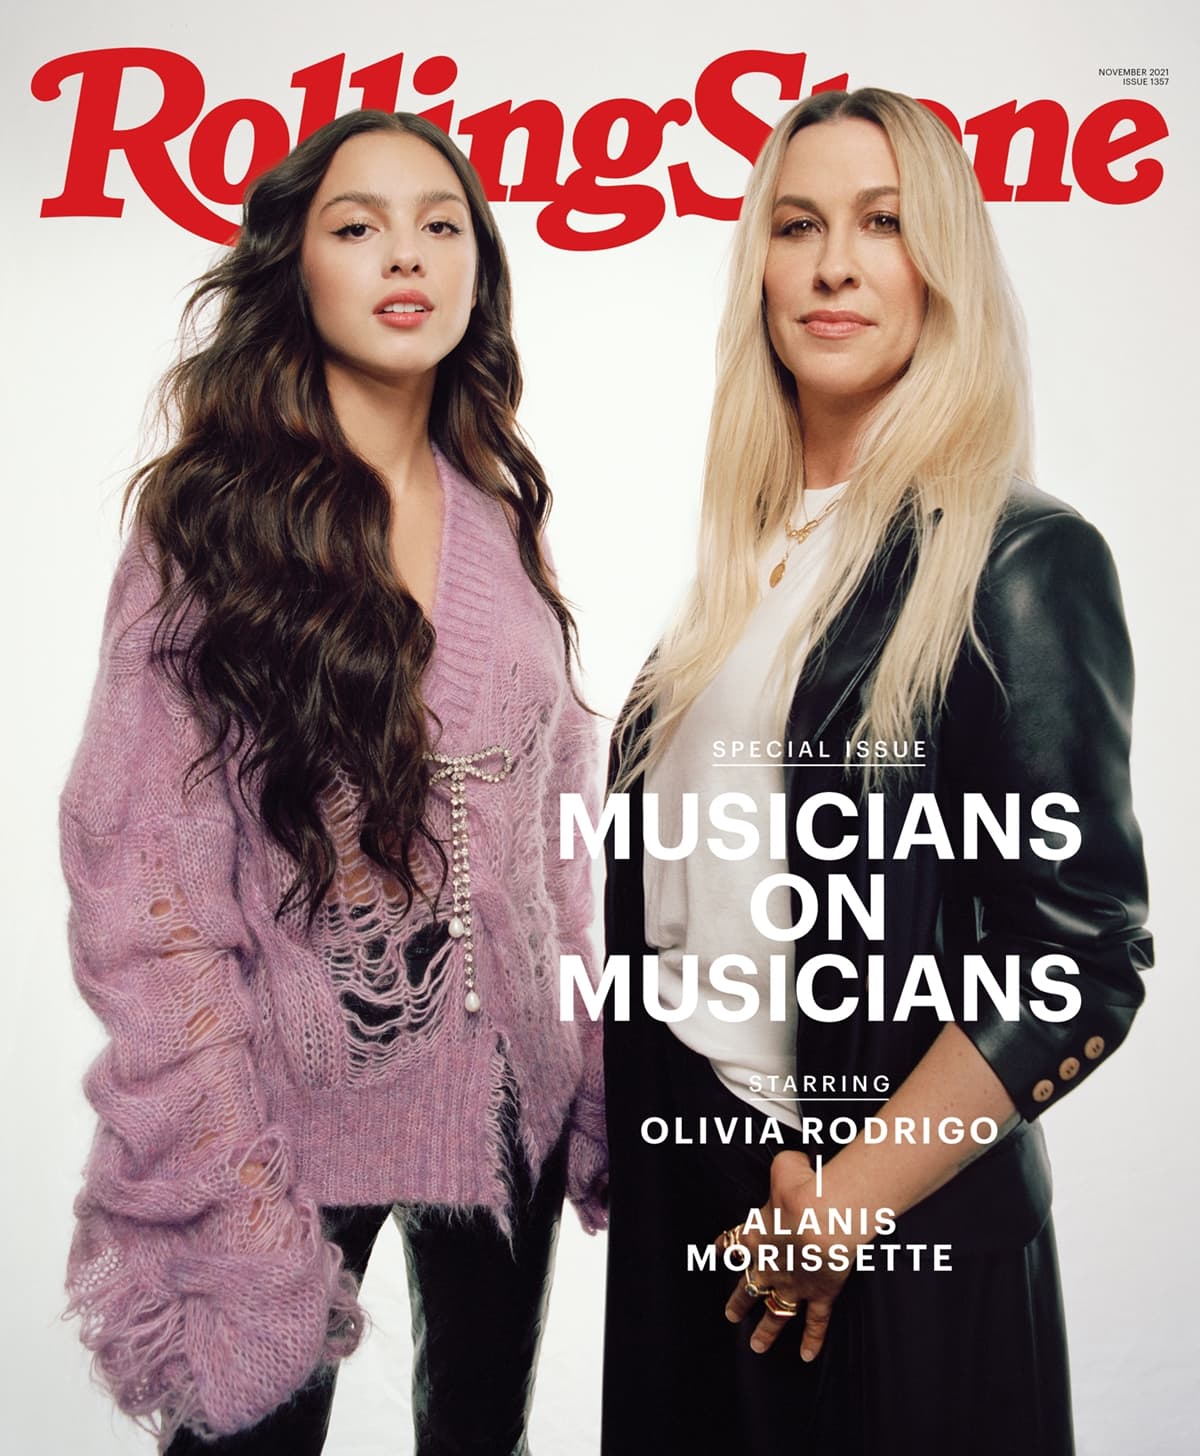 Olivia Rodrigo and Alanis Morissette grace the cover of Rolling Stone's Musician To Musician issue